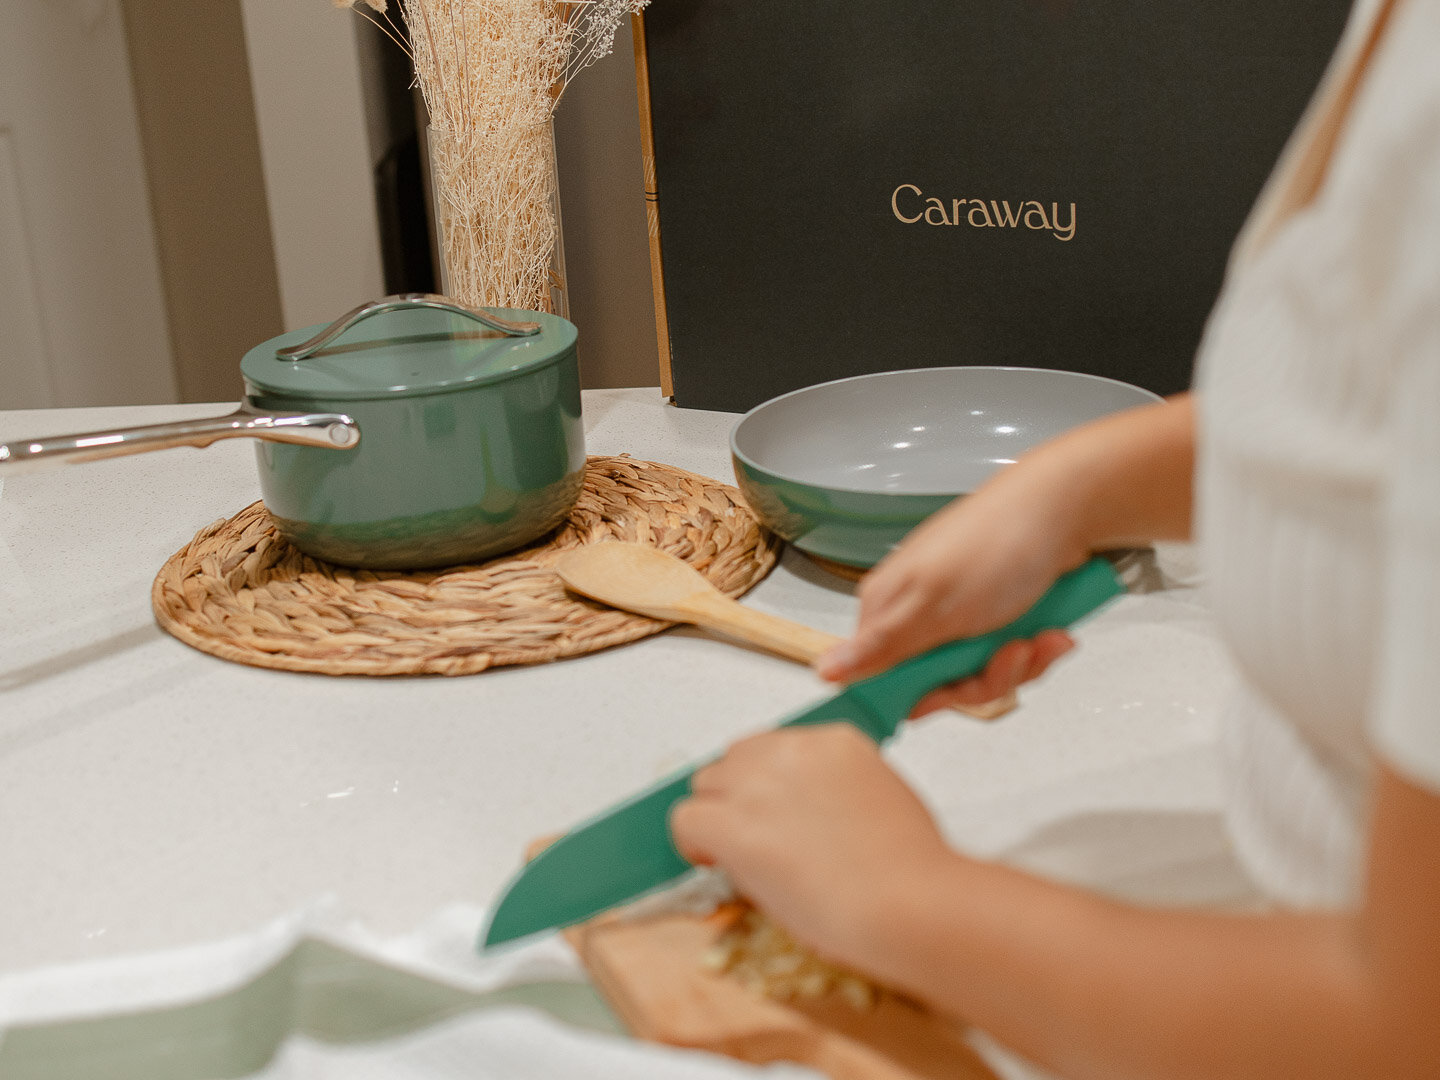 Caraway Home Review - Is It Really THAT Good?